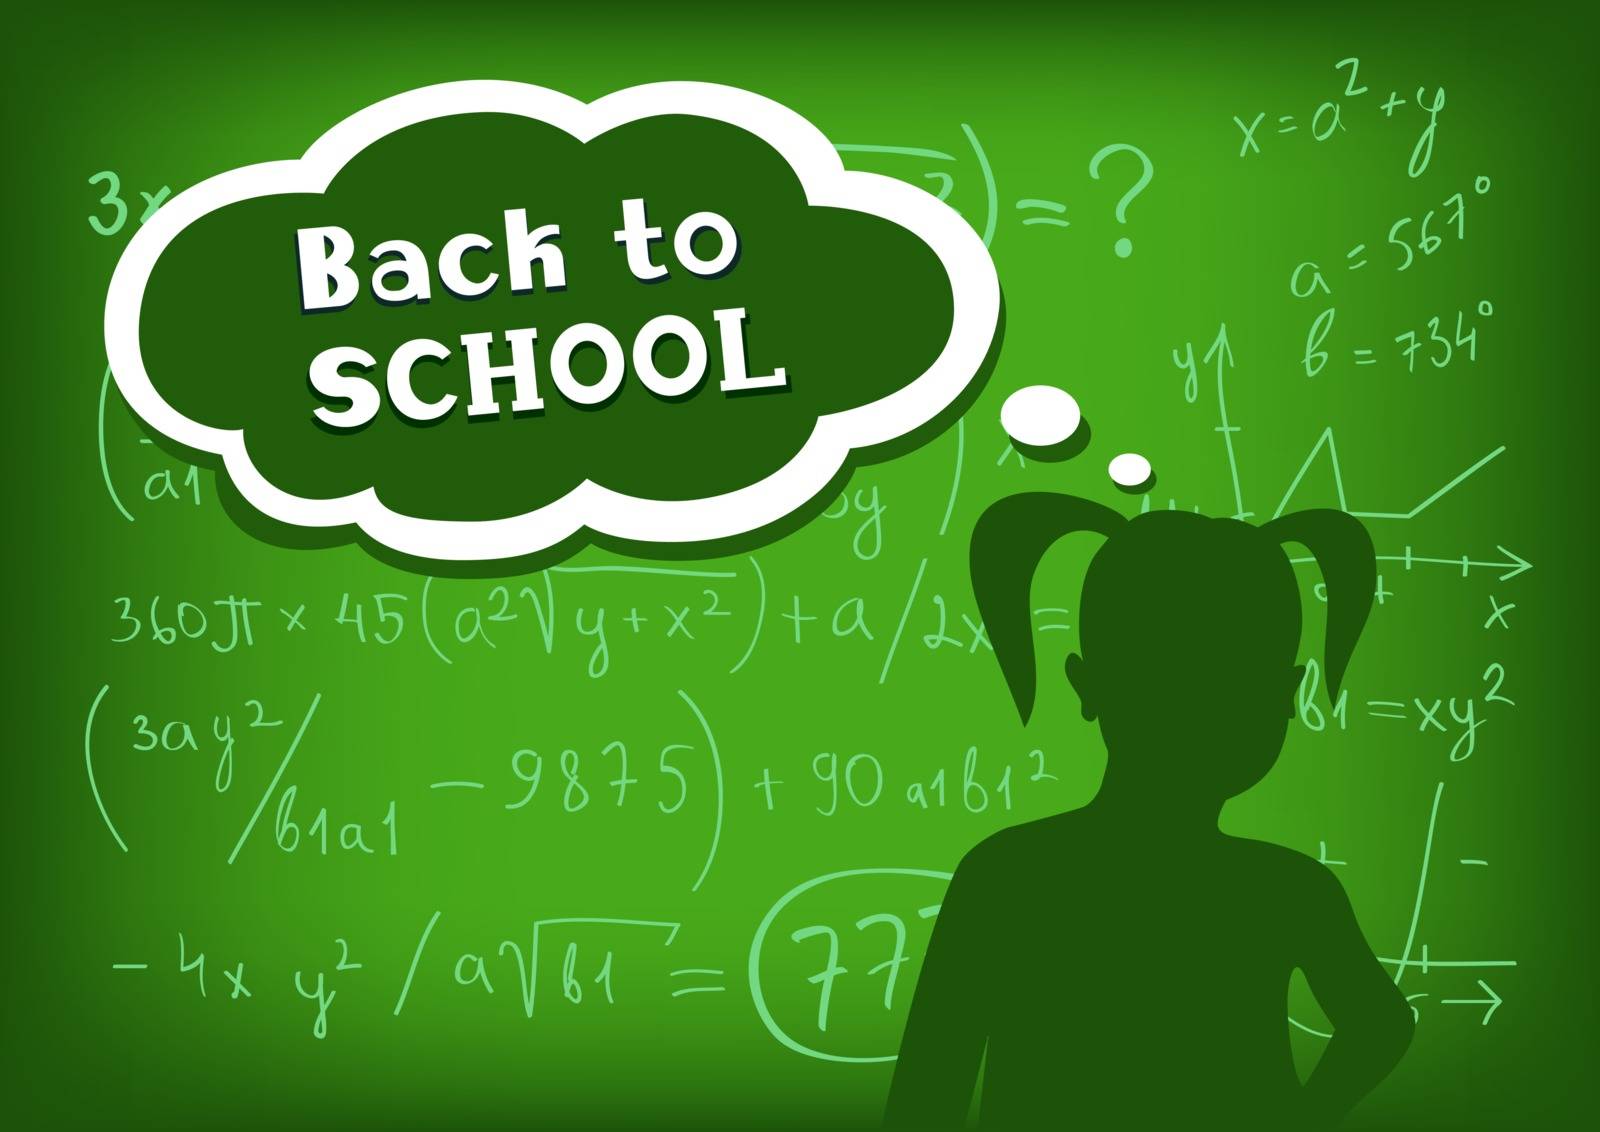 The silhouette of girl who speech and thought amid the school blackboard expect back to school